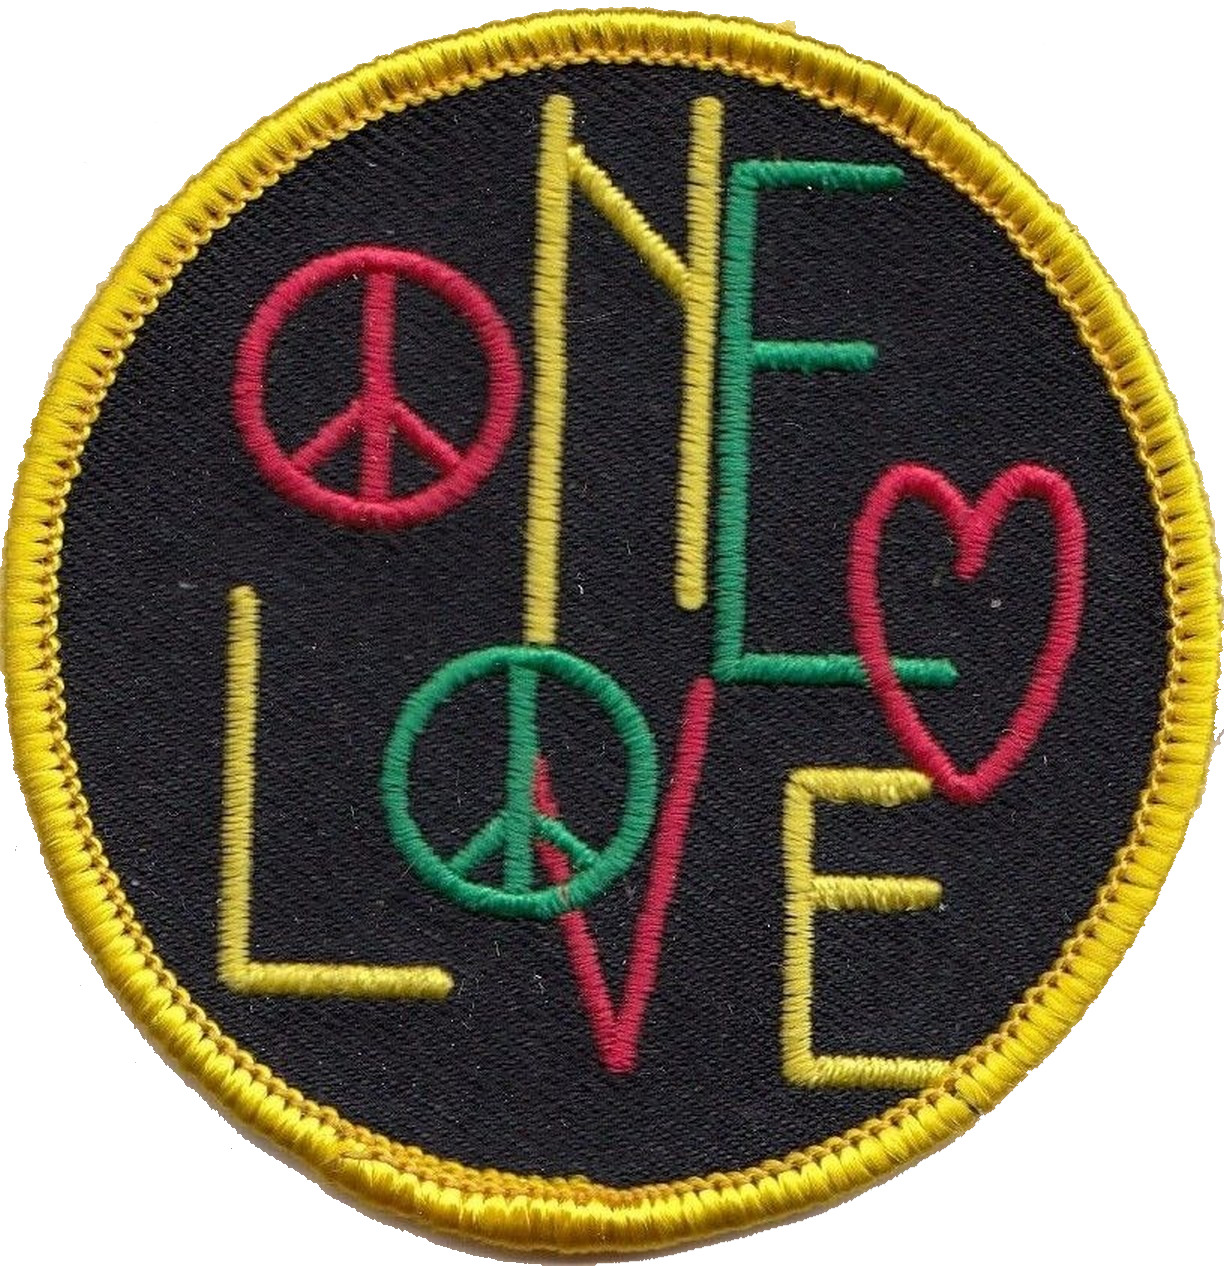 Bob Marley Rastafarian One Love Peace Embroidered Patch